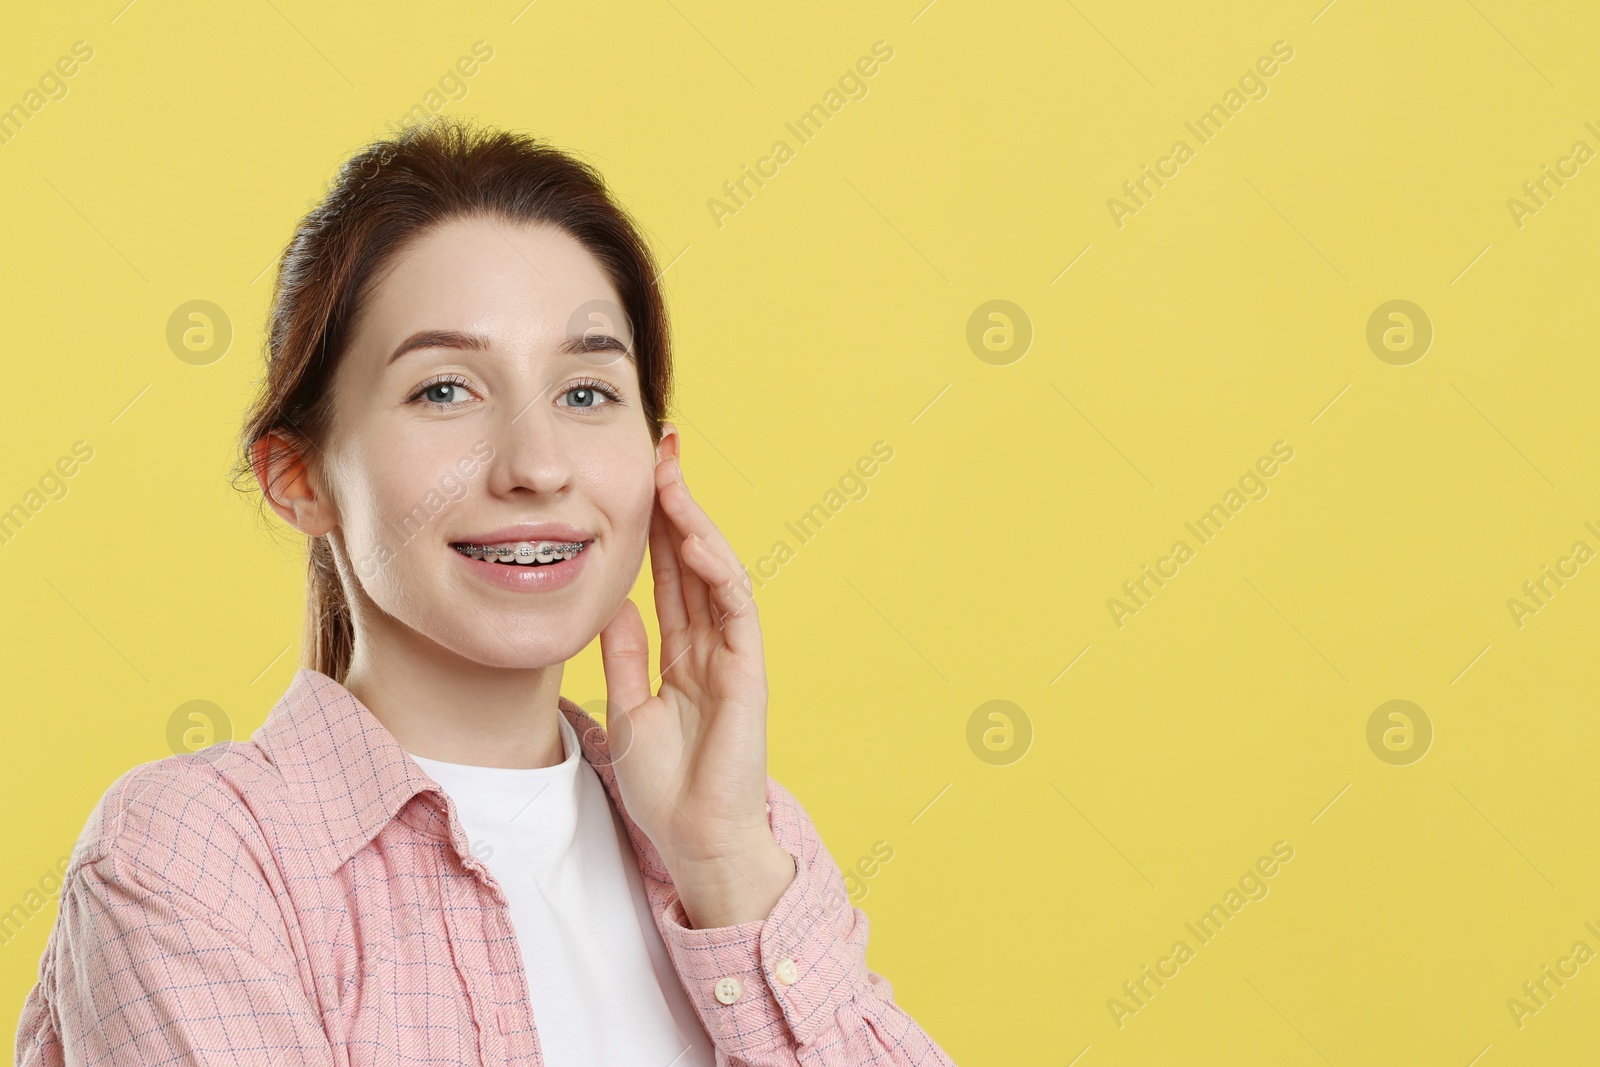 Photo of Portrait of smiling woman with dental braces on yellow background. Space for text